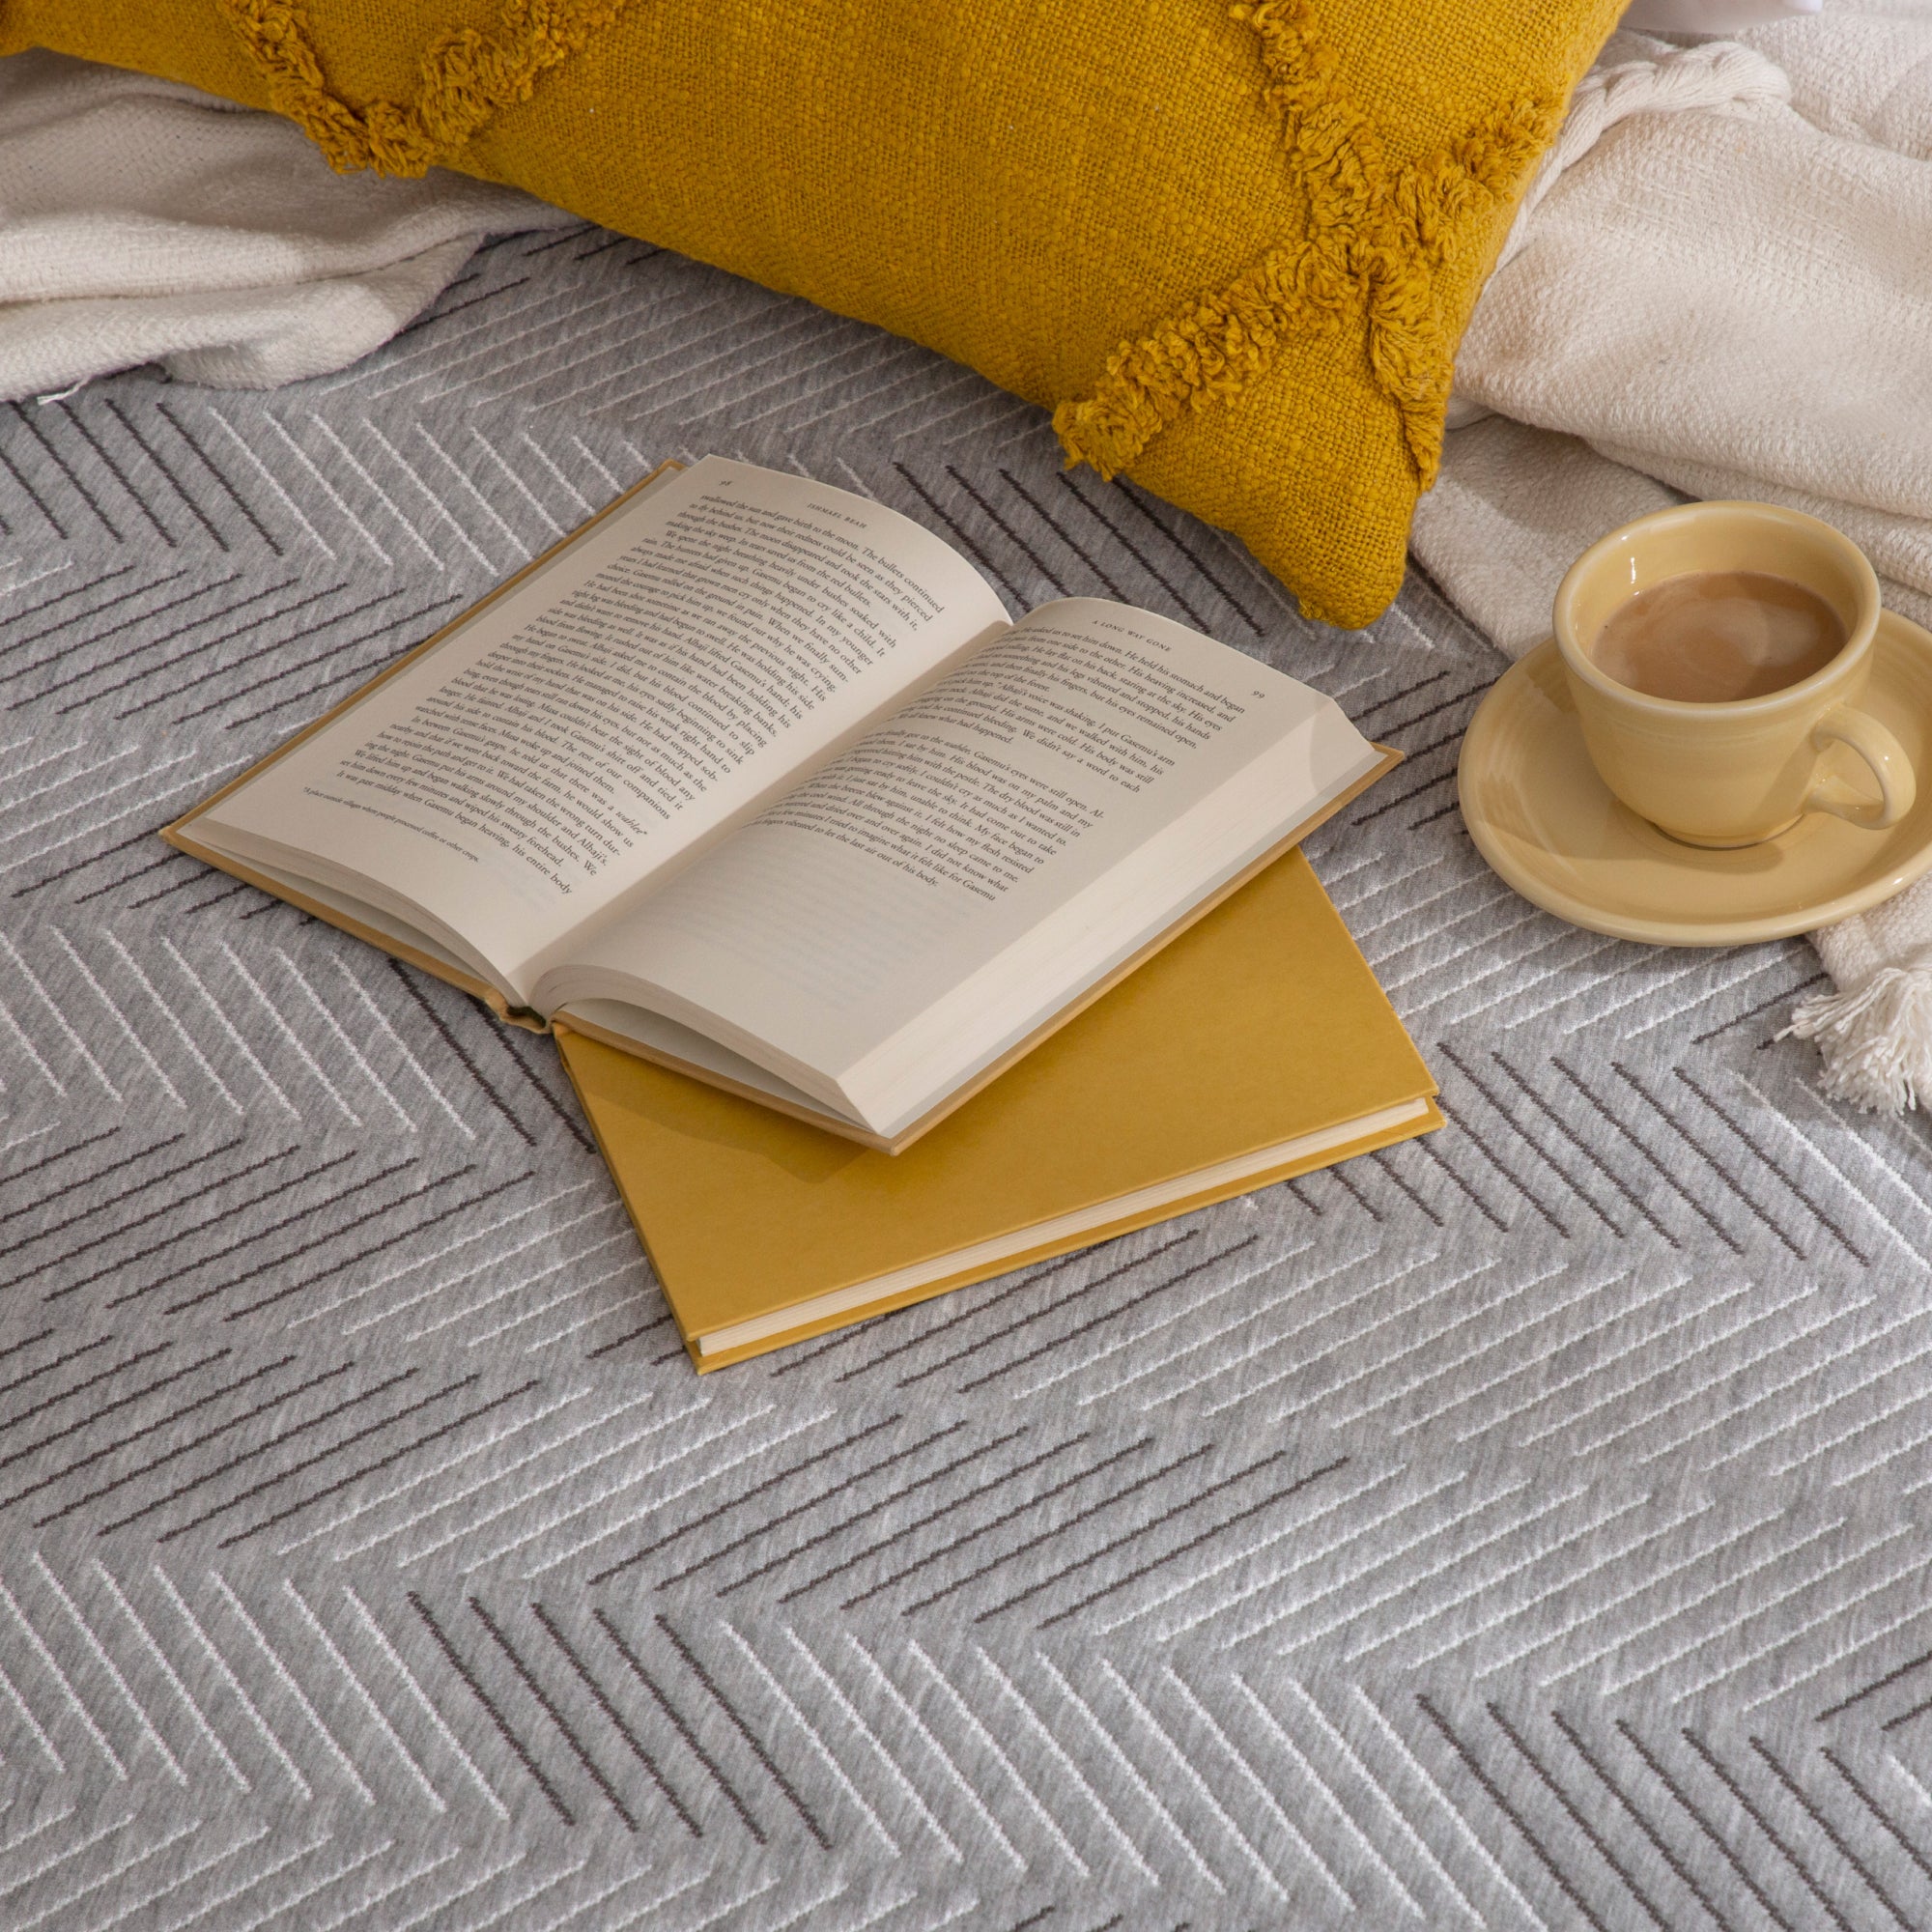 Book and a cup of coffee on Hybrid Plush Mattress